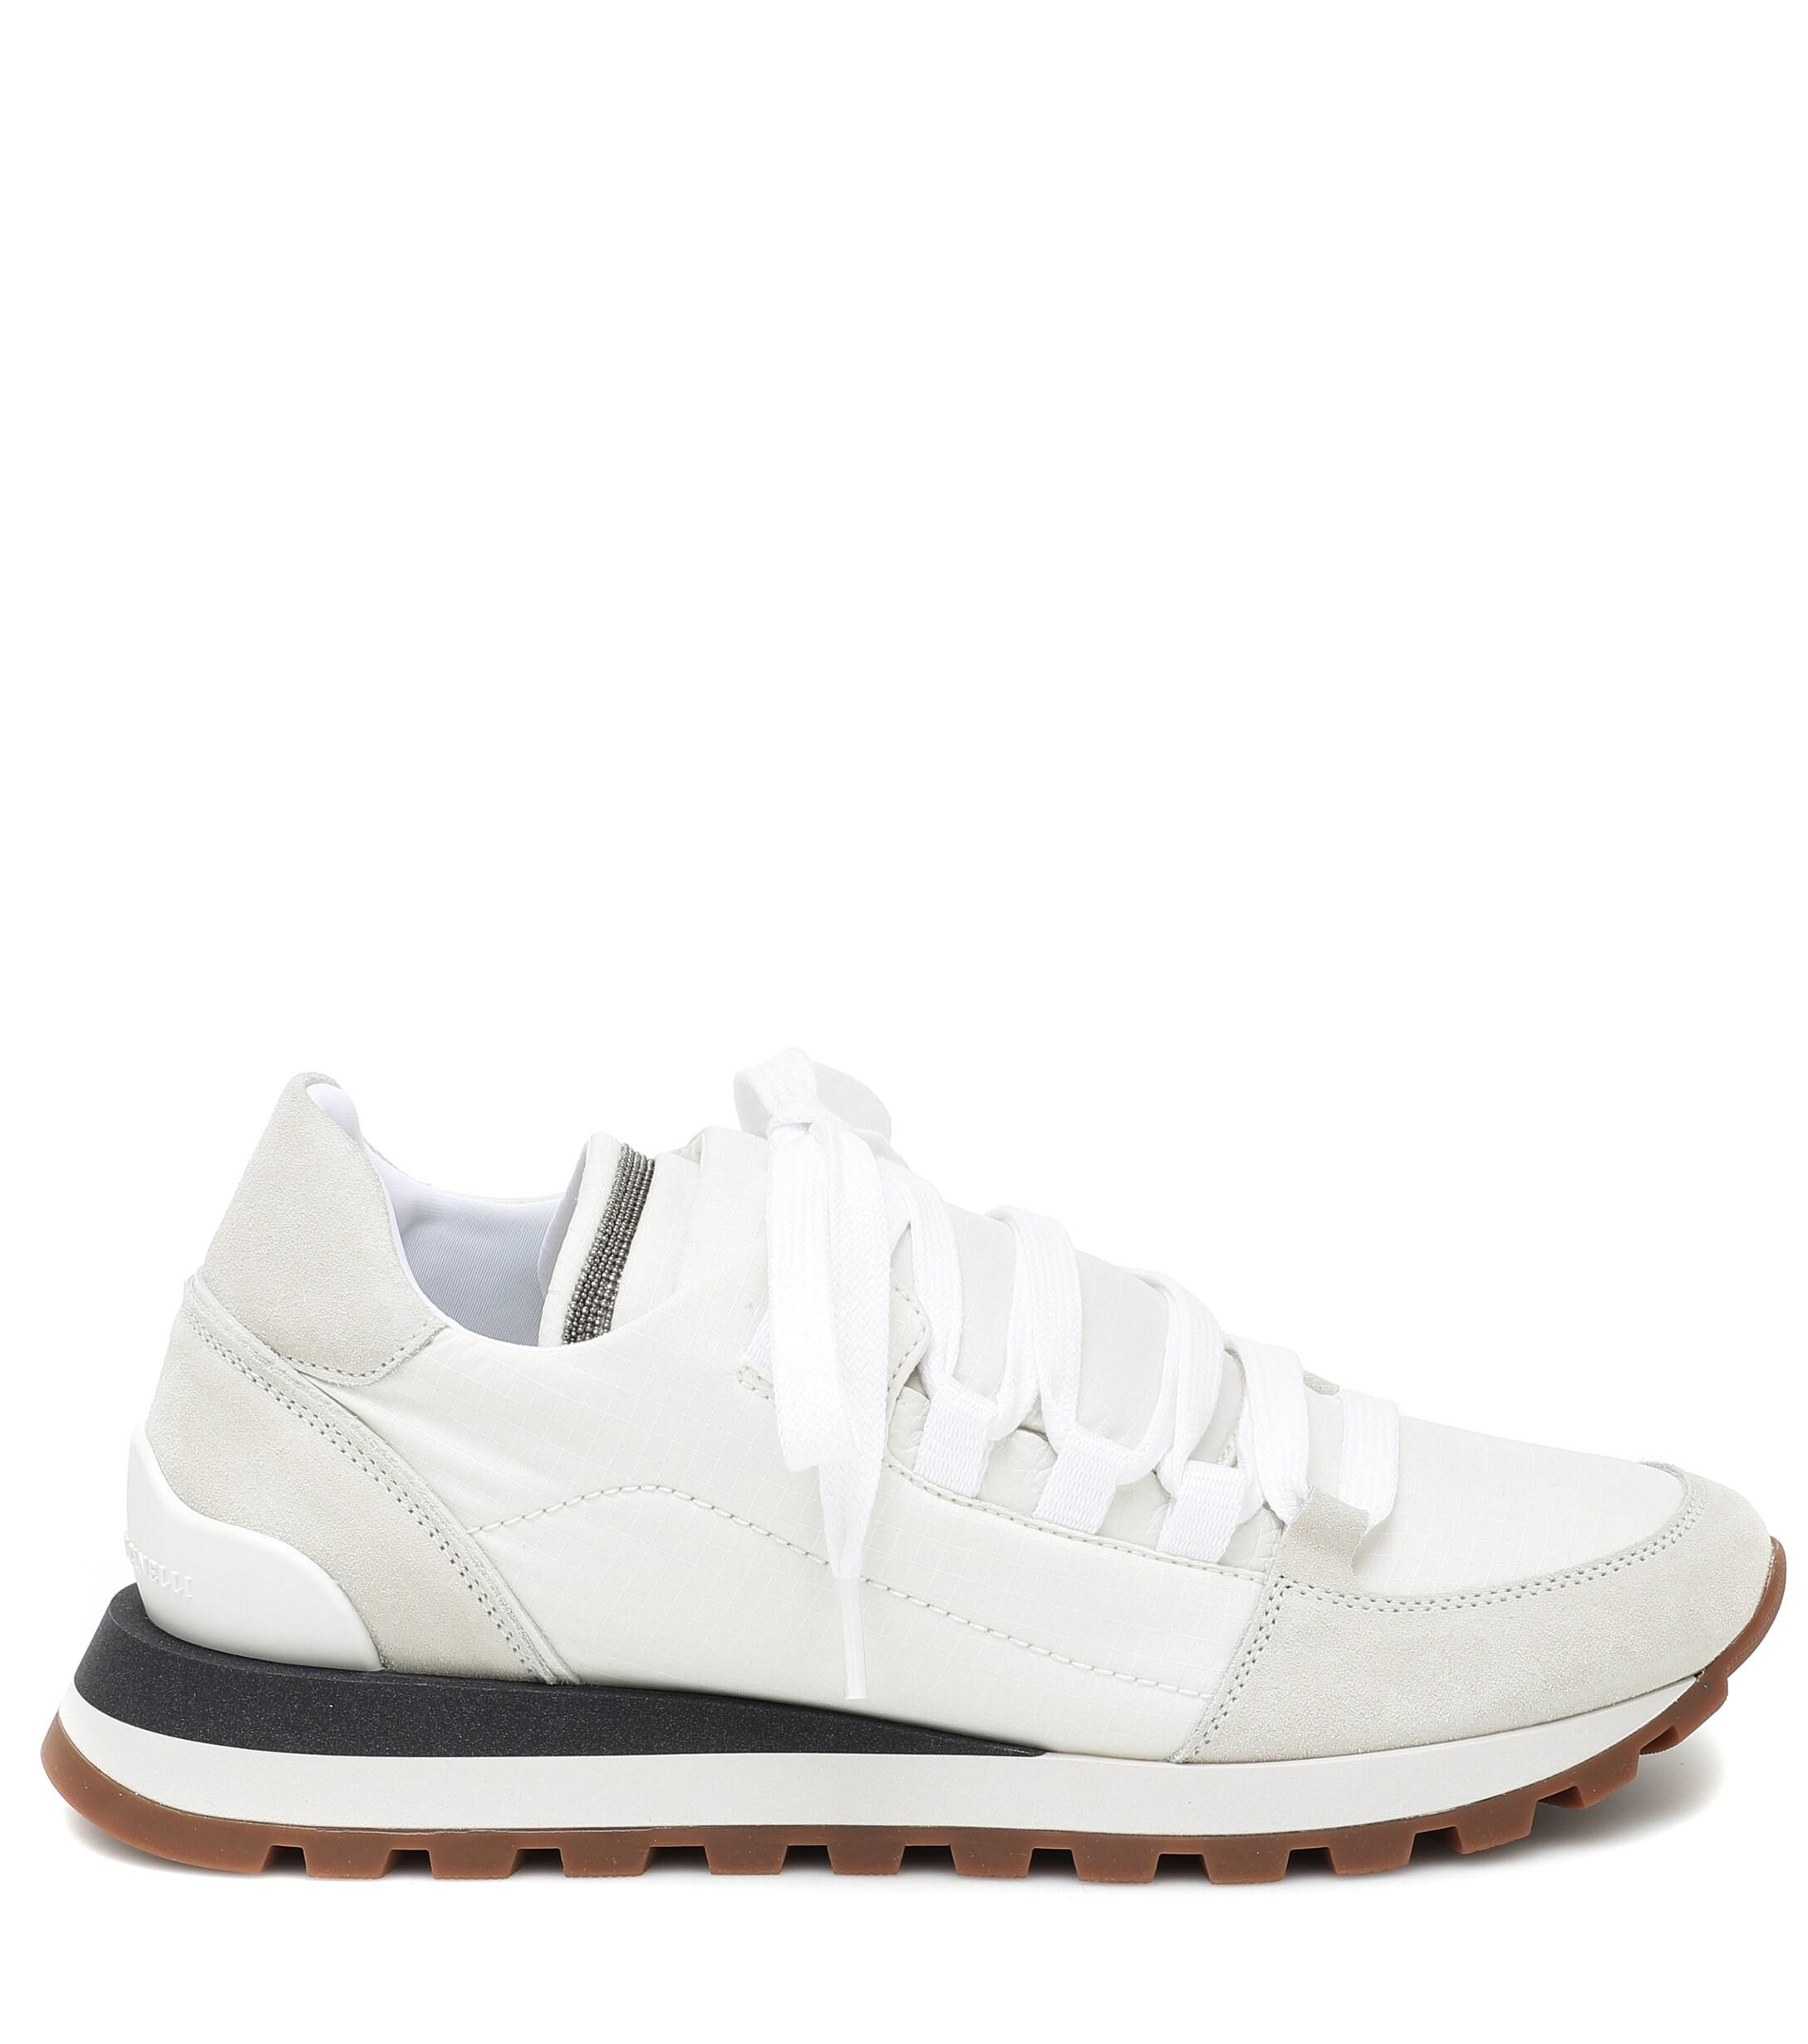 Brunello Cucinelli Suede Embellished Leather Sneakers in White - Lyst